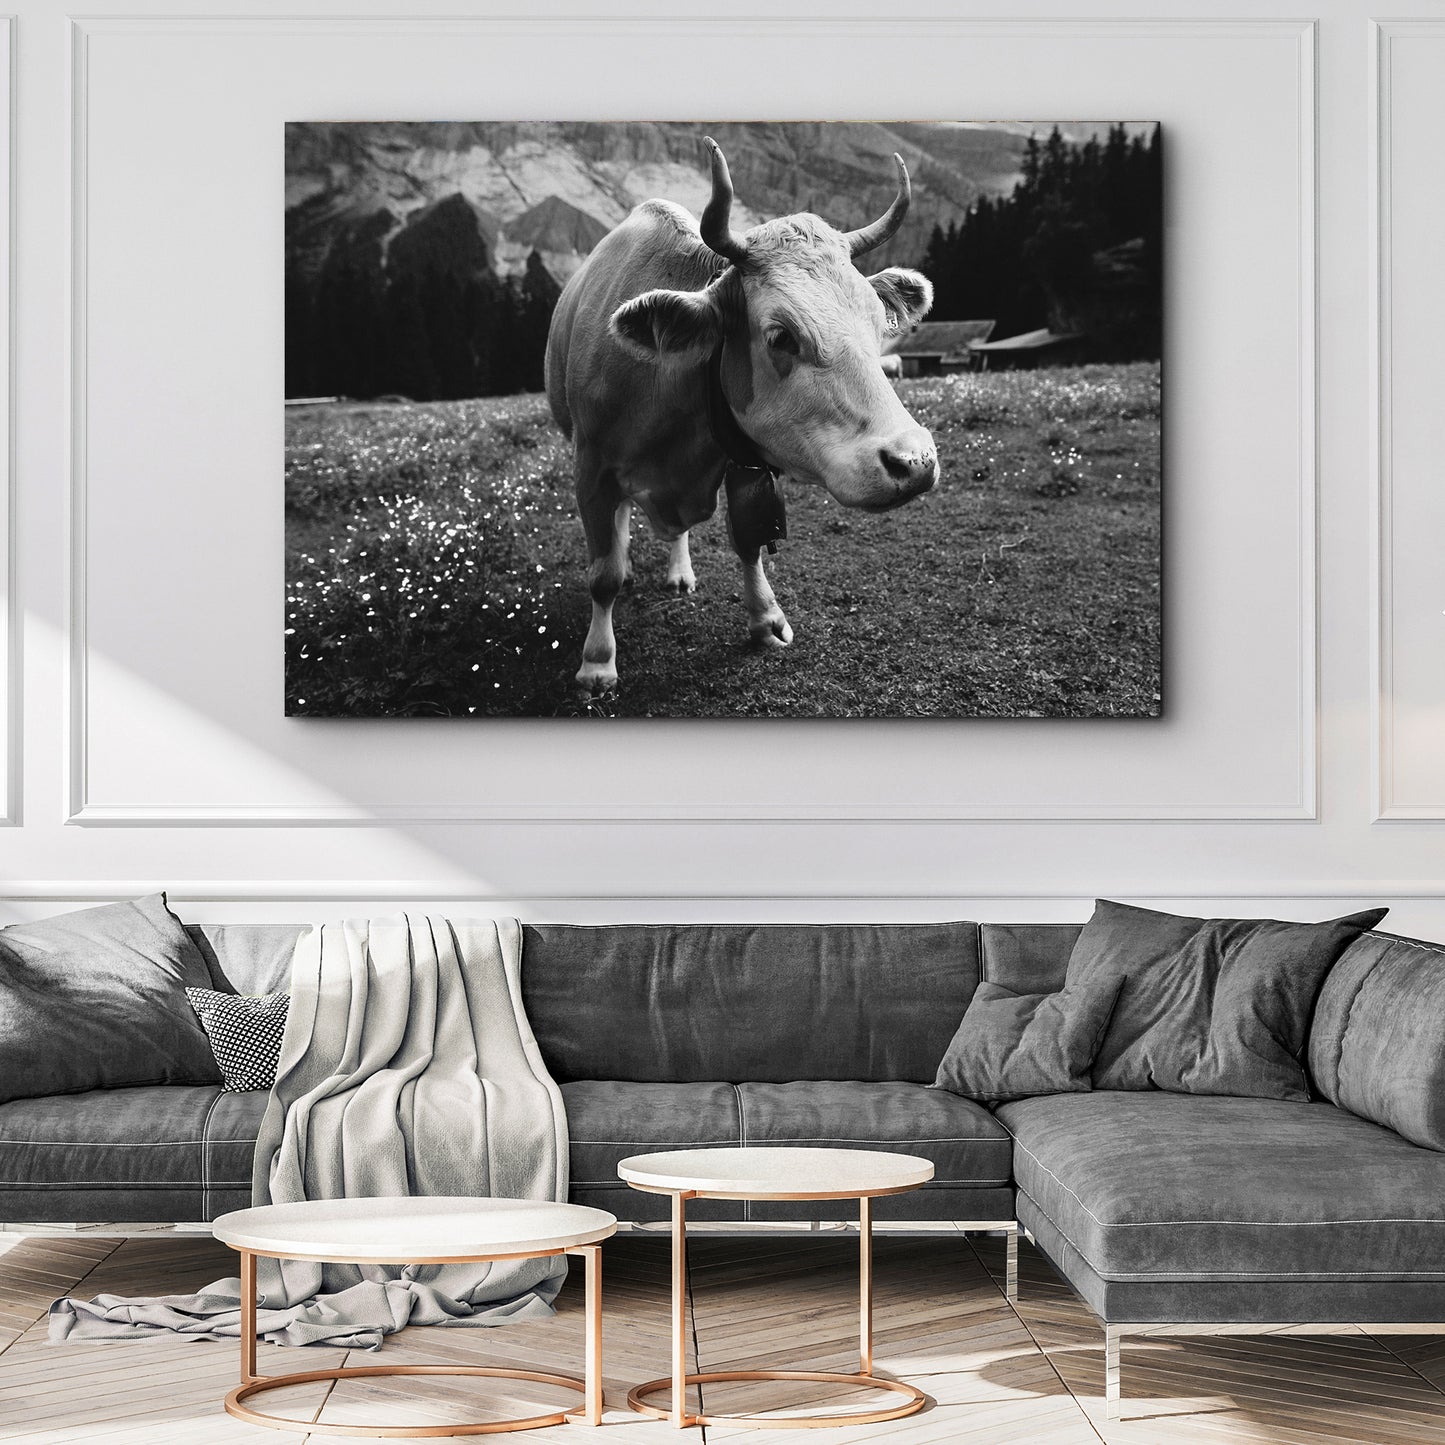 Monochrome Cattle Canvas Wall Art Style 2 - Image by Tailored Canvases